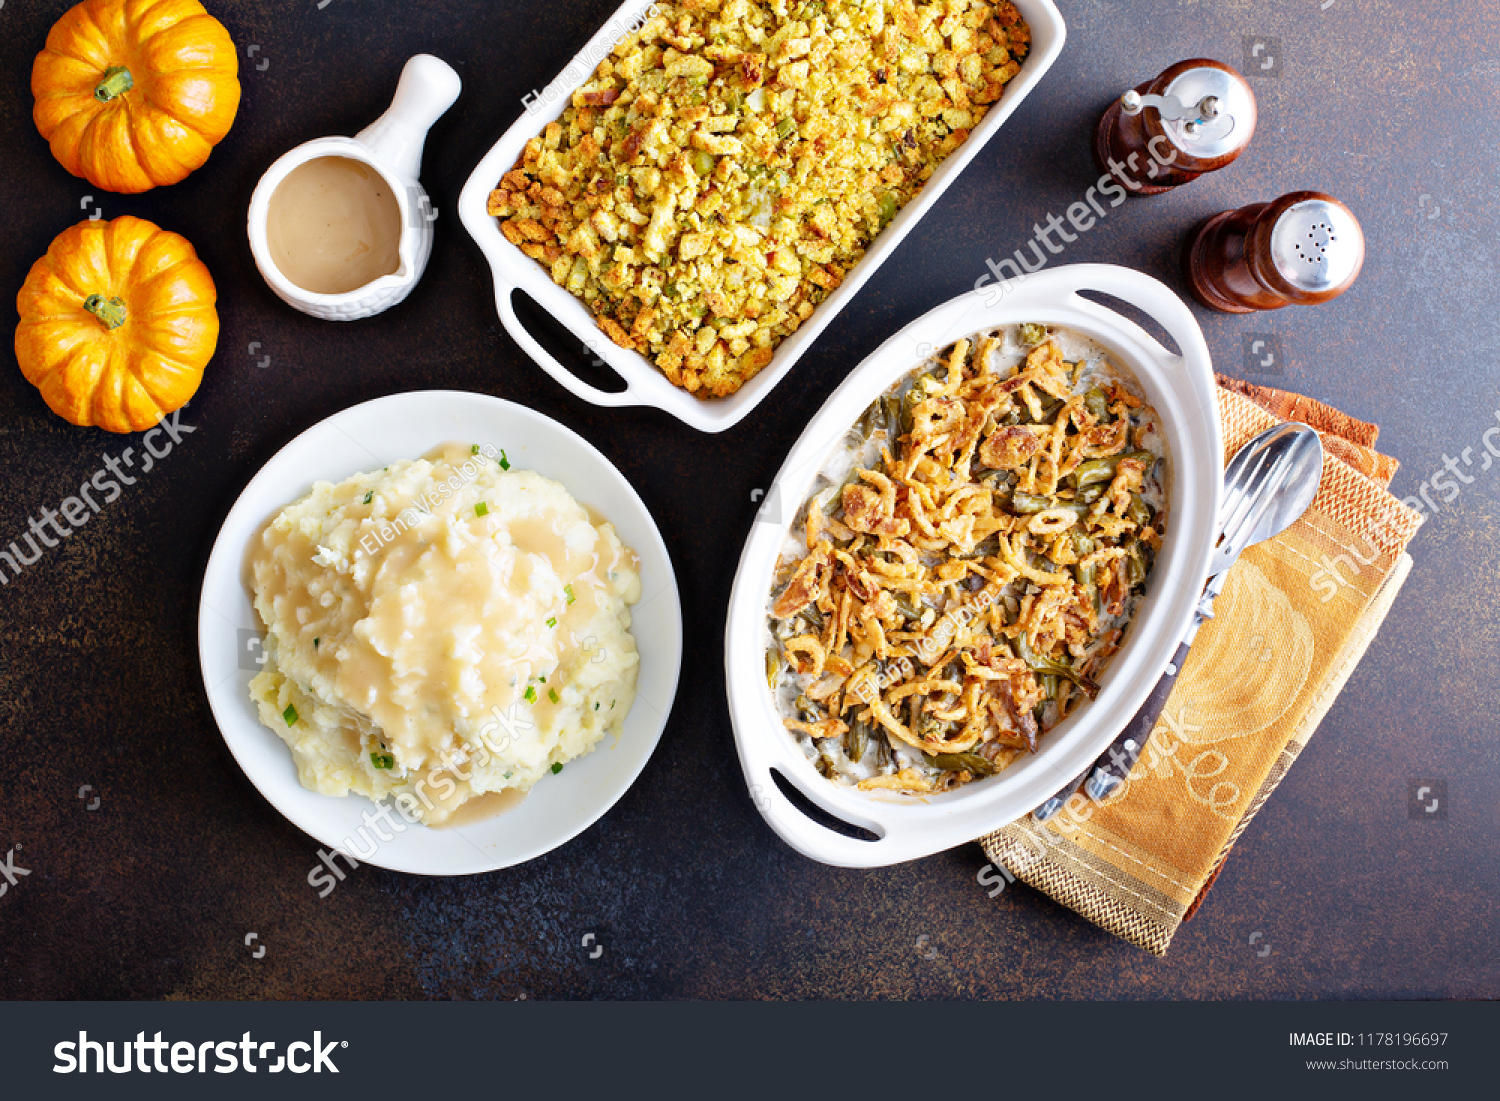 All Traditional Thanksgiving Side Dishes Mashed Stock Photo Edit Now 1178196697,Kitchen Table Centerpiece Ideas For Everyday